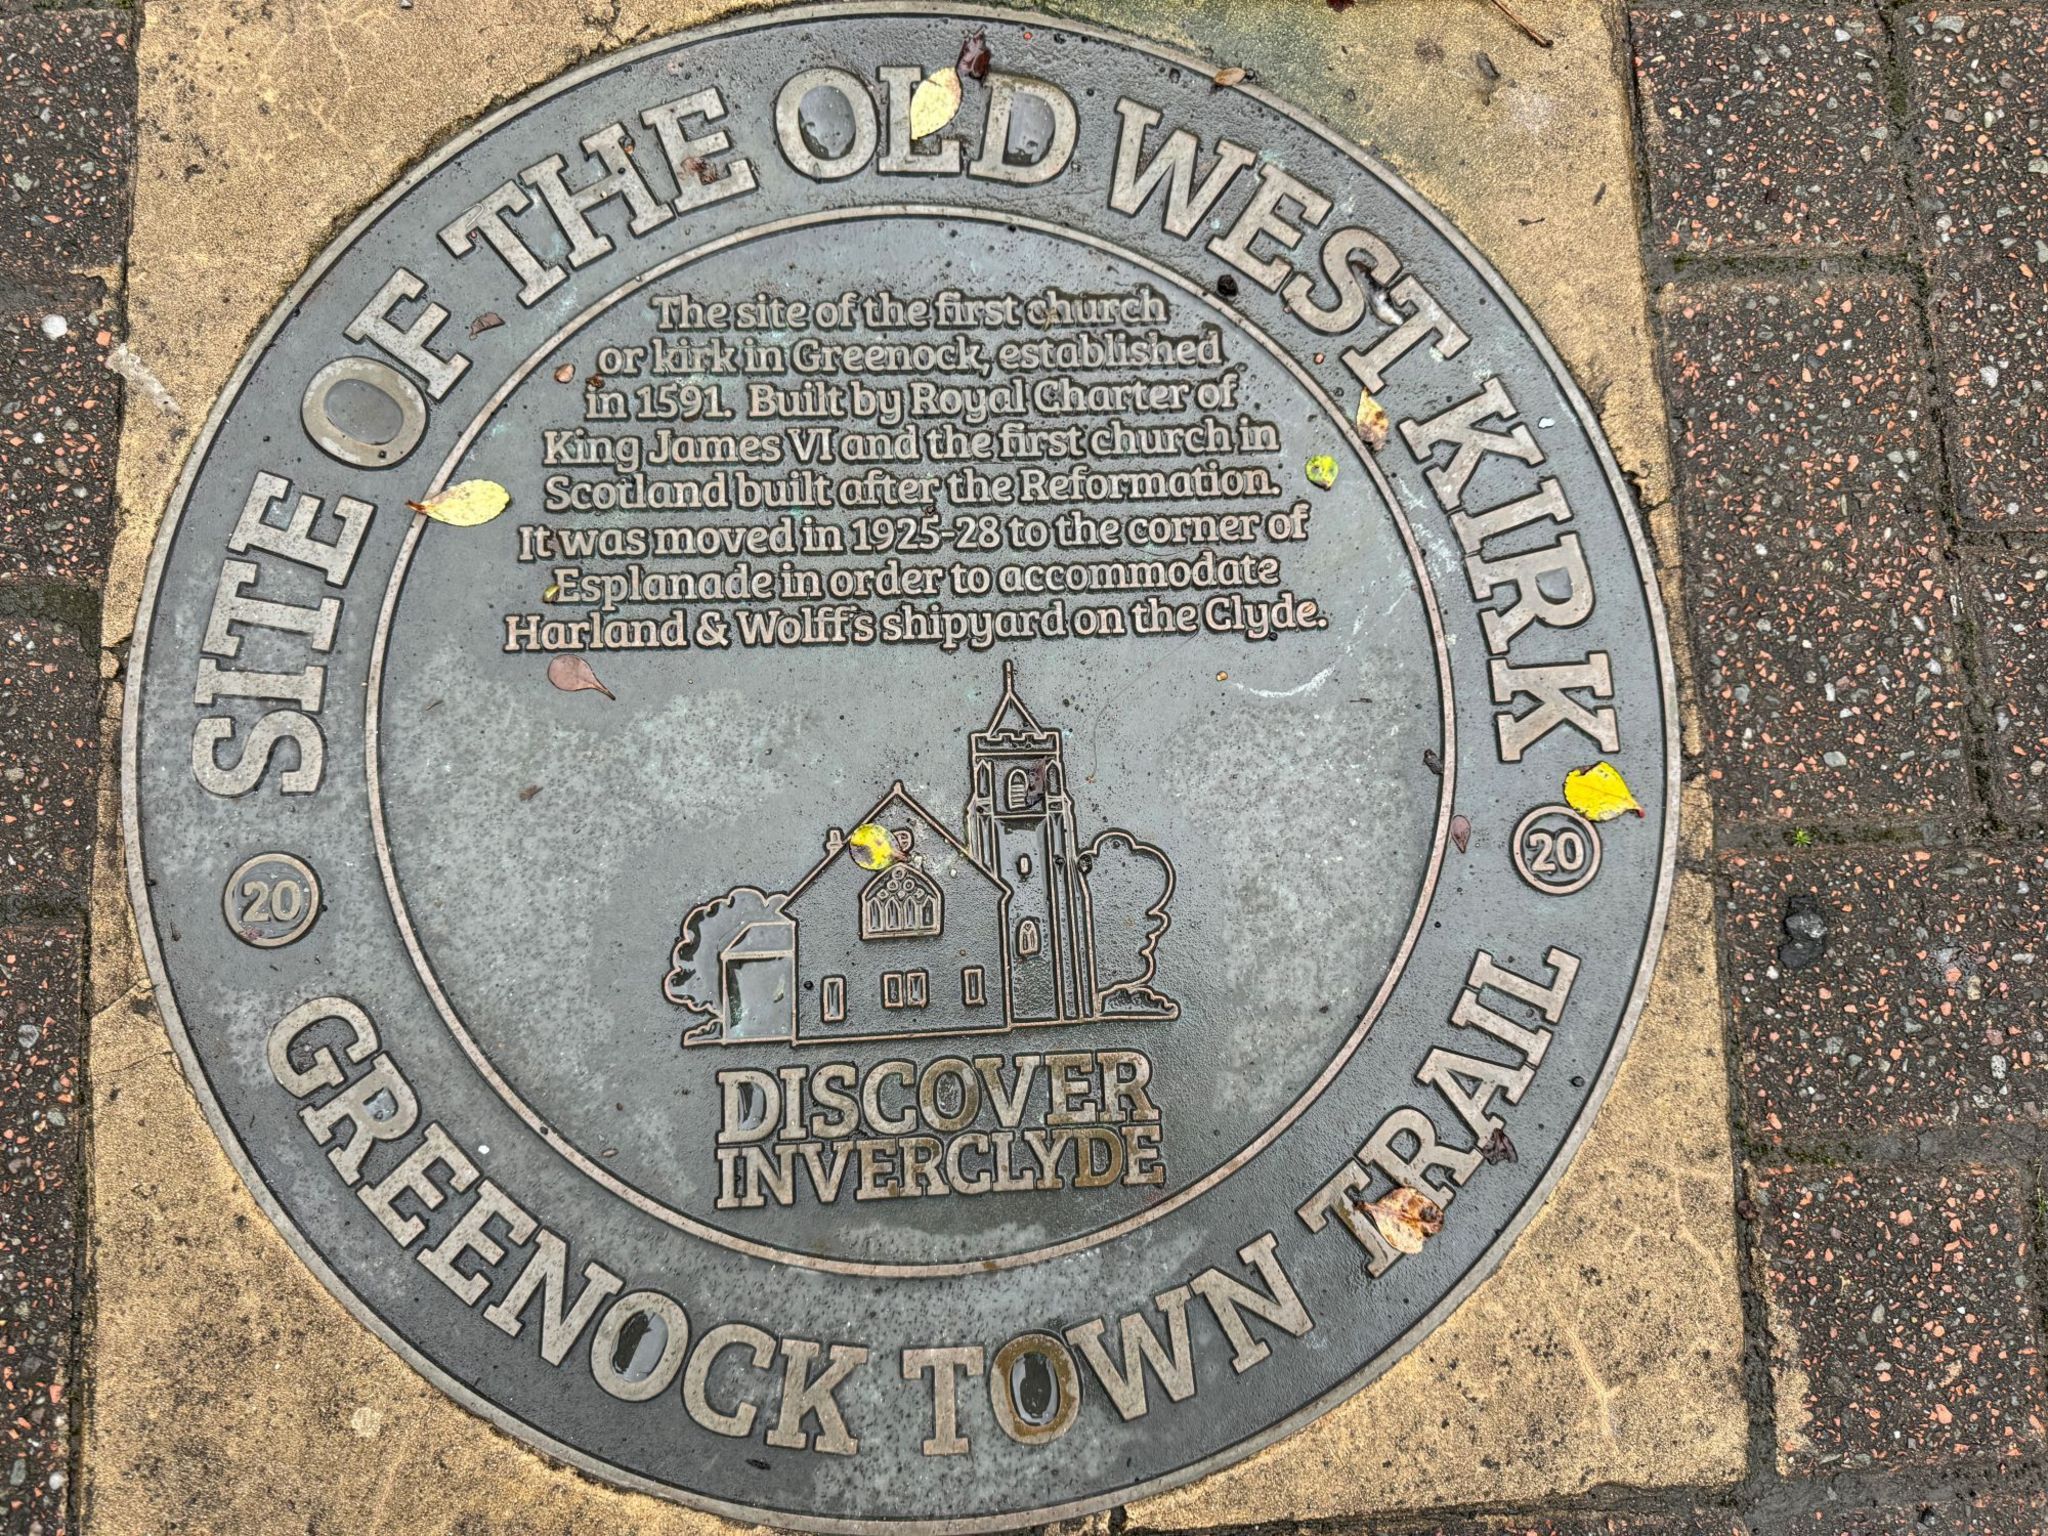 Plaque on the grounds of the original site of the church which reads: "Site of the Old West Kirk. The site of the first church or kirk in Greenock established in 1591. Built by Royal Charter of King James VI and the first church in Scotland built after the Reformation. It was moved in 1925-28 to the corner of Esplanade in order to accommodate Harland & Wolff's shipyard on the Clyde@